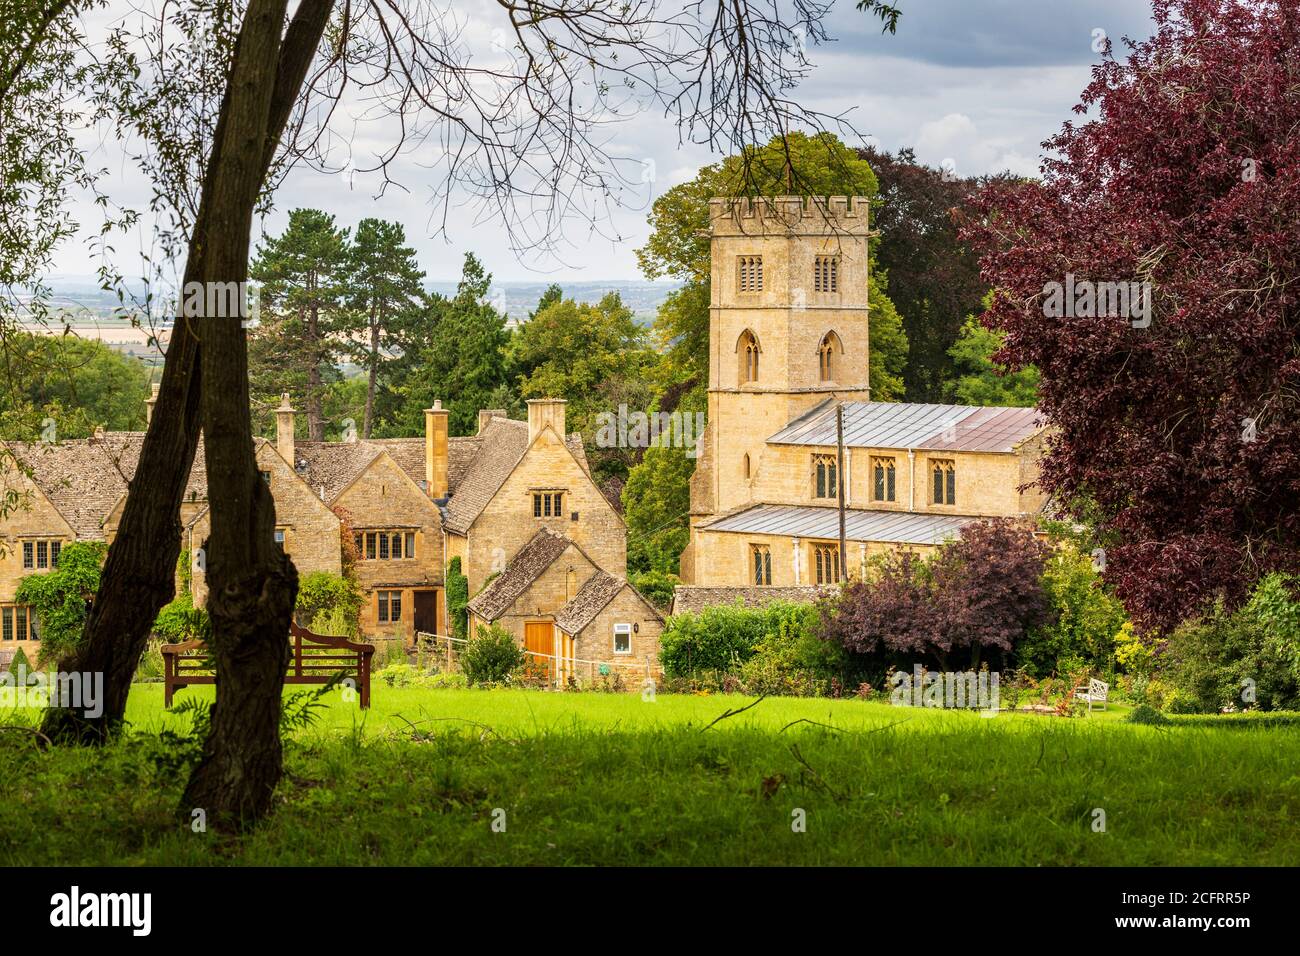 The church of St Michael in the Cotswold village of Buckland from the grounds of the Buckland Hotel, Gloucestershire, England Stock Photo